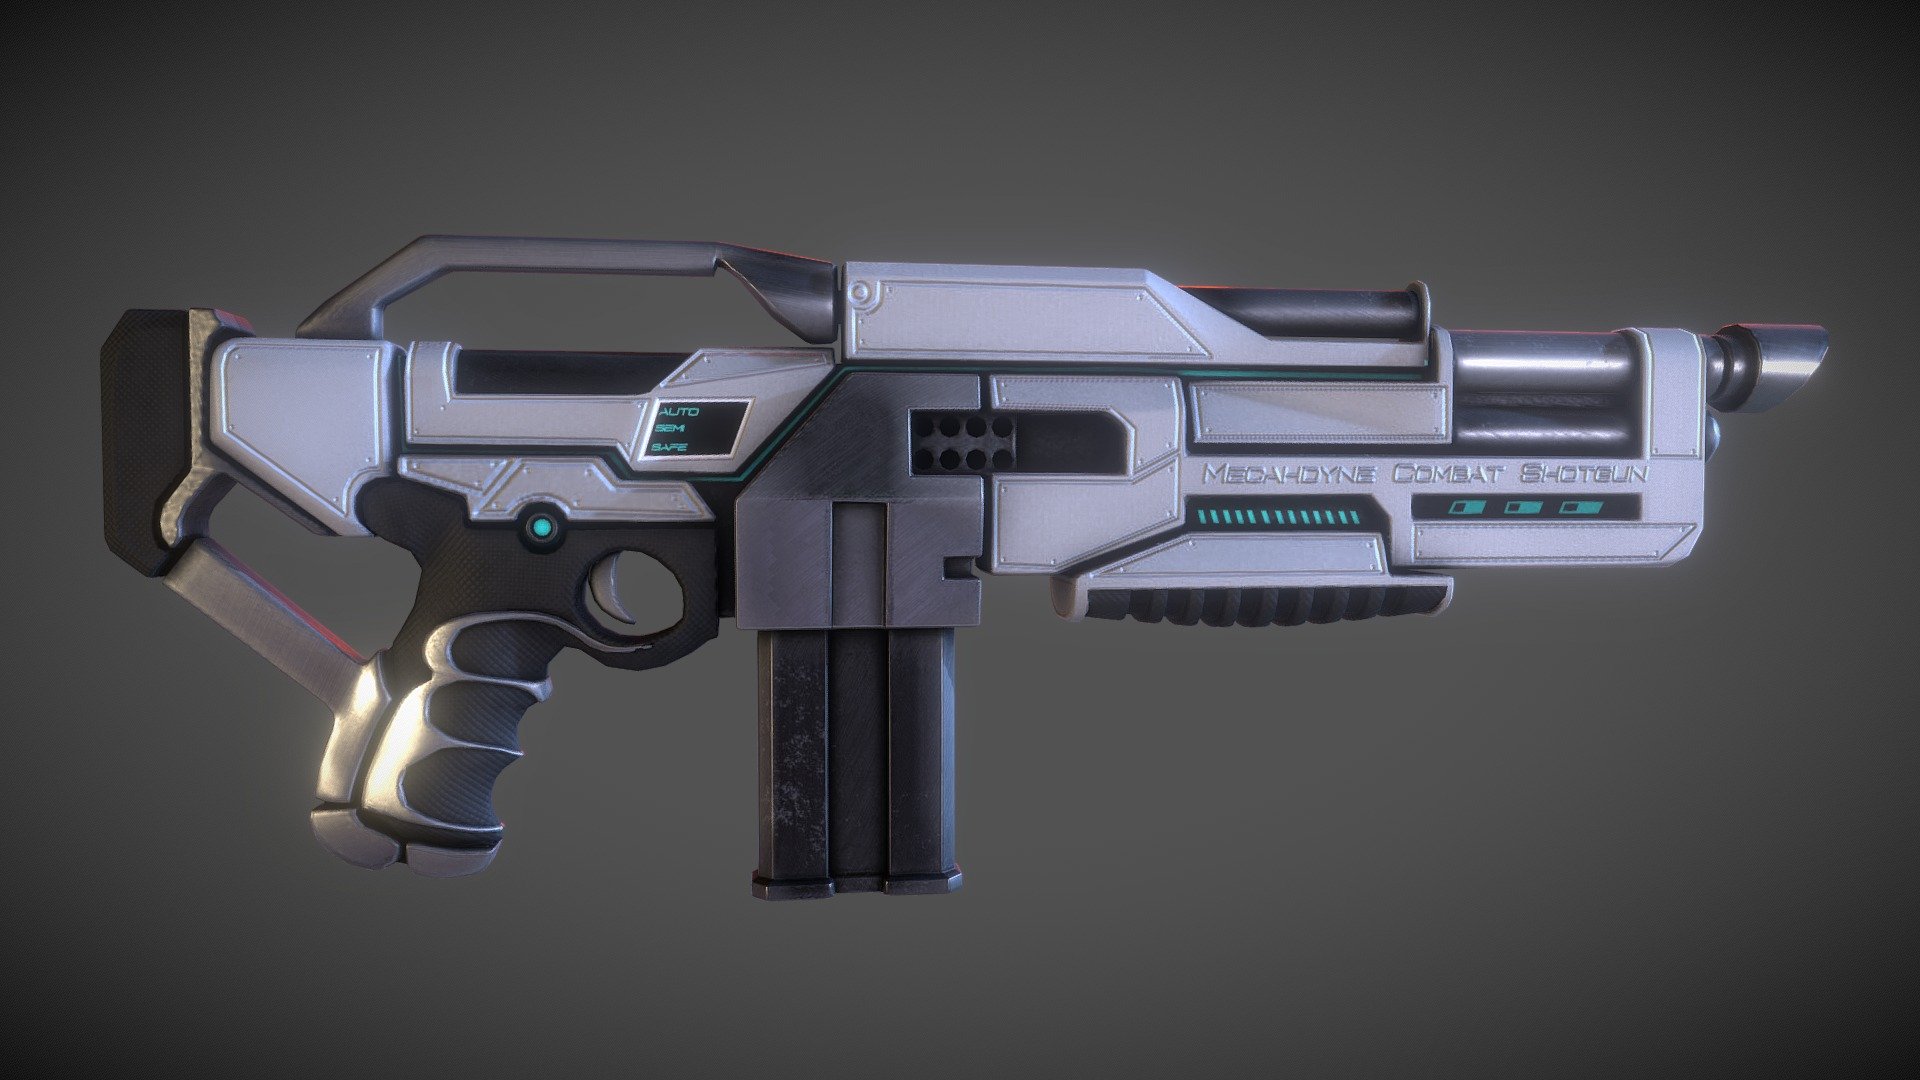 A scifi combat shotgun gameasset with a cyberpunk style flair. 2k texture map, PBR.
can also by purchased with effects and animations from the unreal engine asset store under the title: SciFi Guns Minipack 2 - SciFi Combat shotgun - Buy Royalty Free 3D model by Kim Niemann (@kimn) 3d model